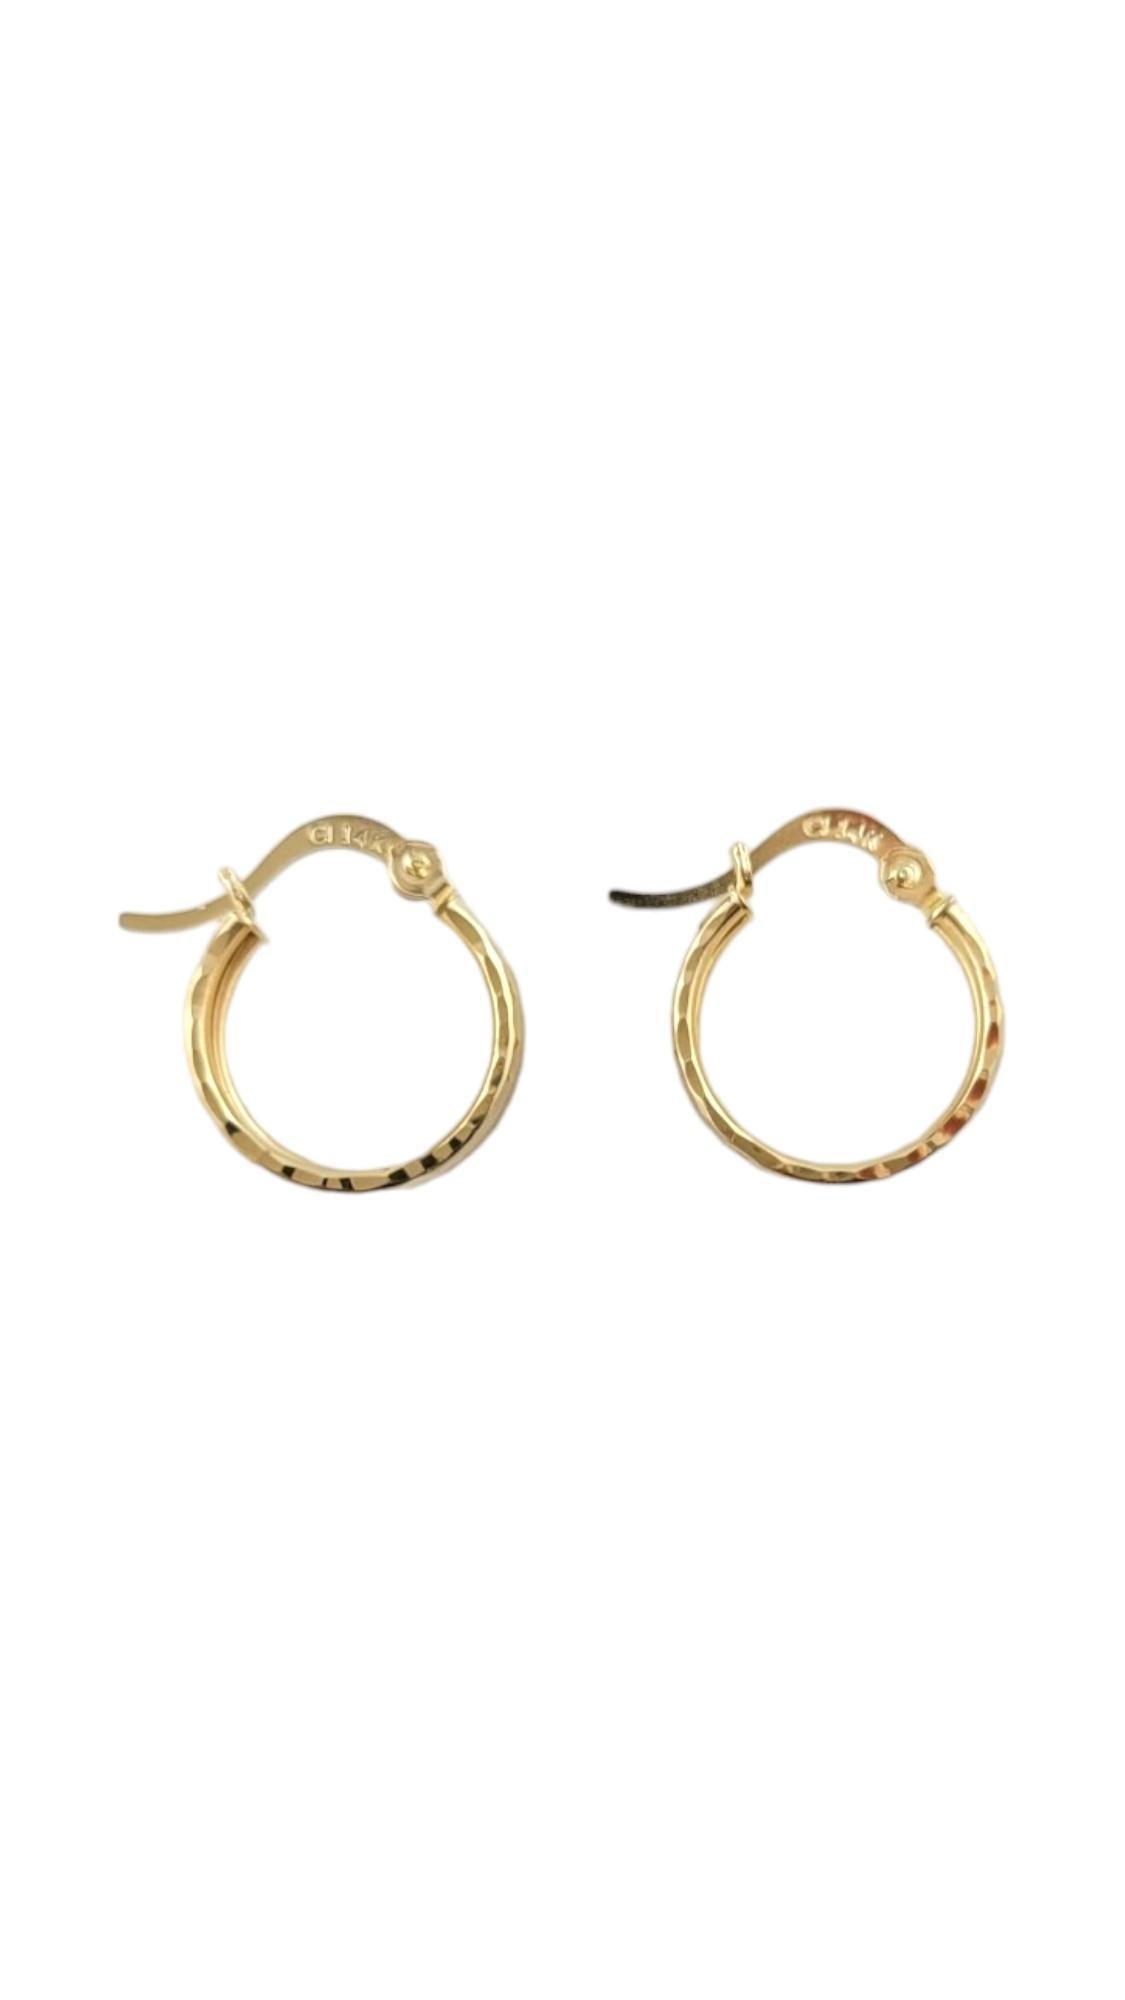 14 Karat Yellow Gold Small Hoop Earrings-

These 14K yellow gold small hoops are a gorgeous addition to your jewelry collection. 

Size: 14.0 mm x 5.5 mm x 1.2 mm

Stamped: CI 14K

Weight: 0.7 dwt./ 1.2 gr.

Very good condition, professionally